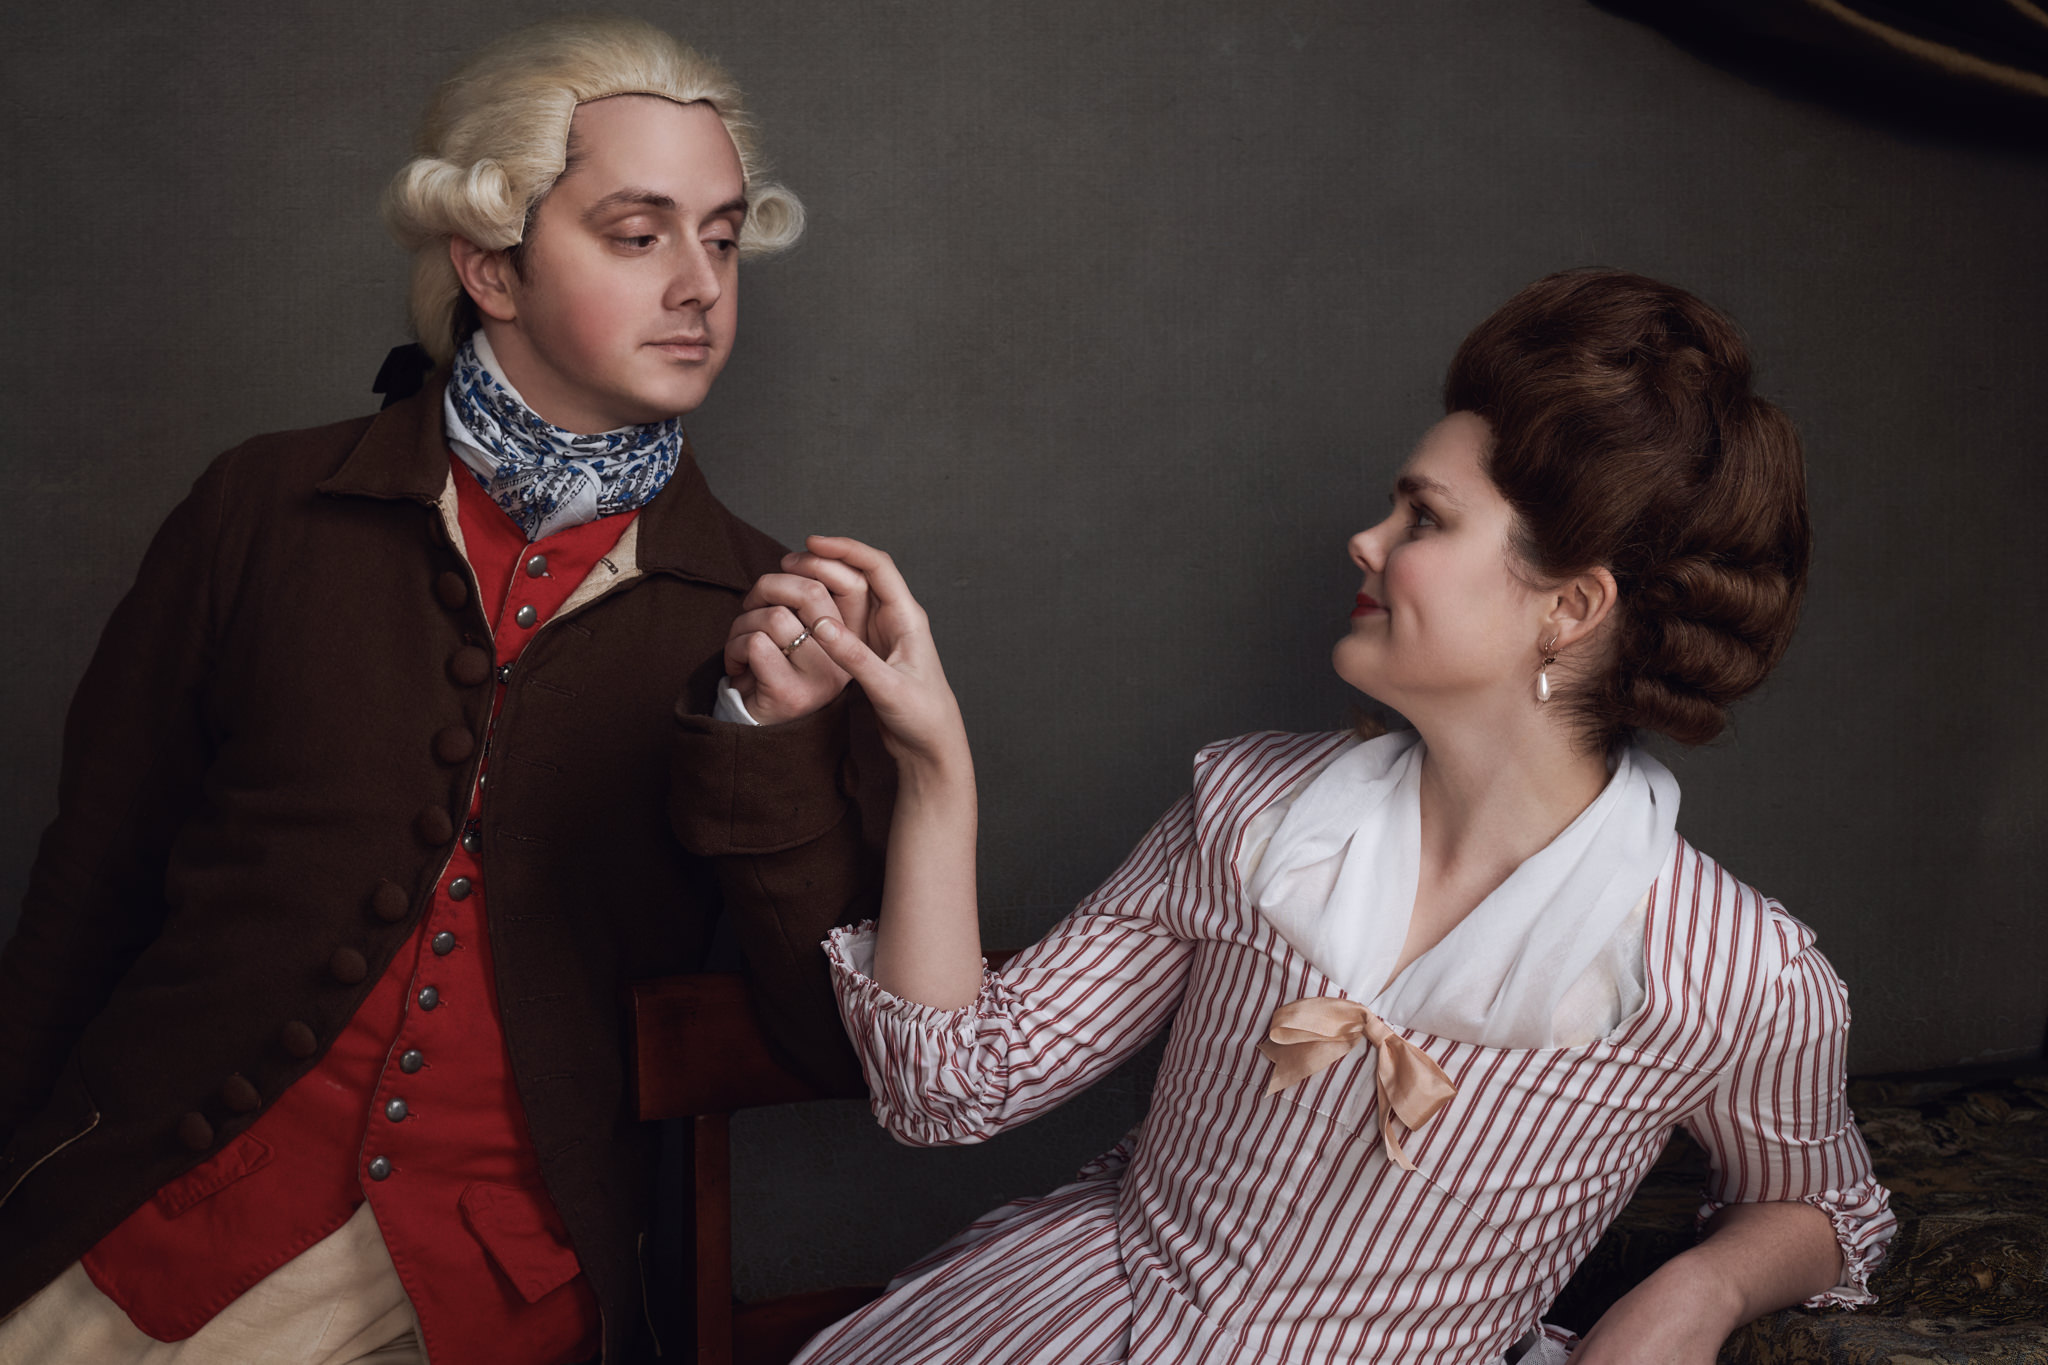 The Esquire with his lady, who is wearing one of our "discreet" custom historical wigs, dressed in an 18th century style.